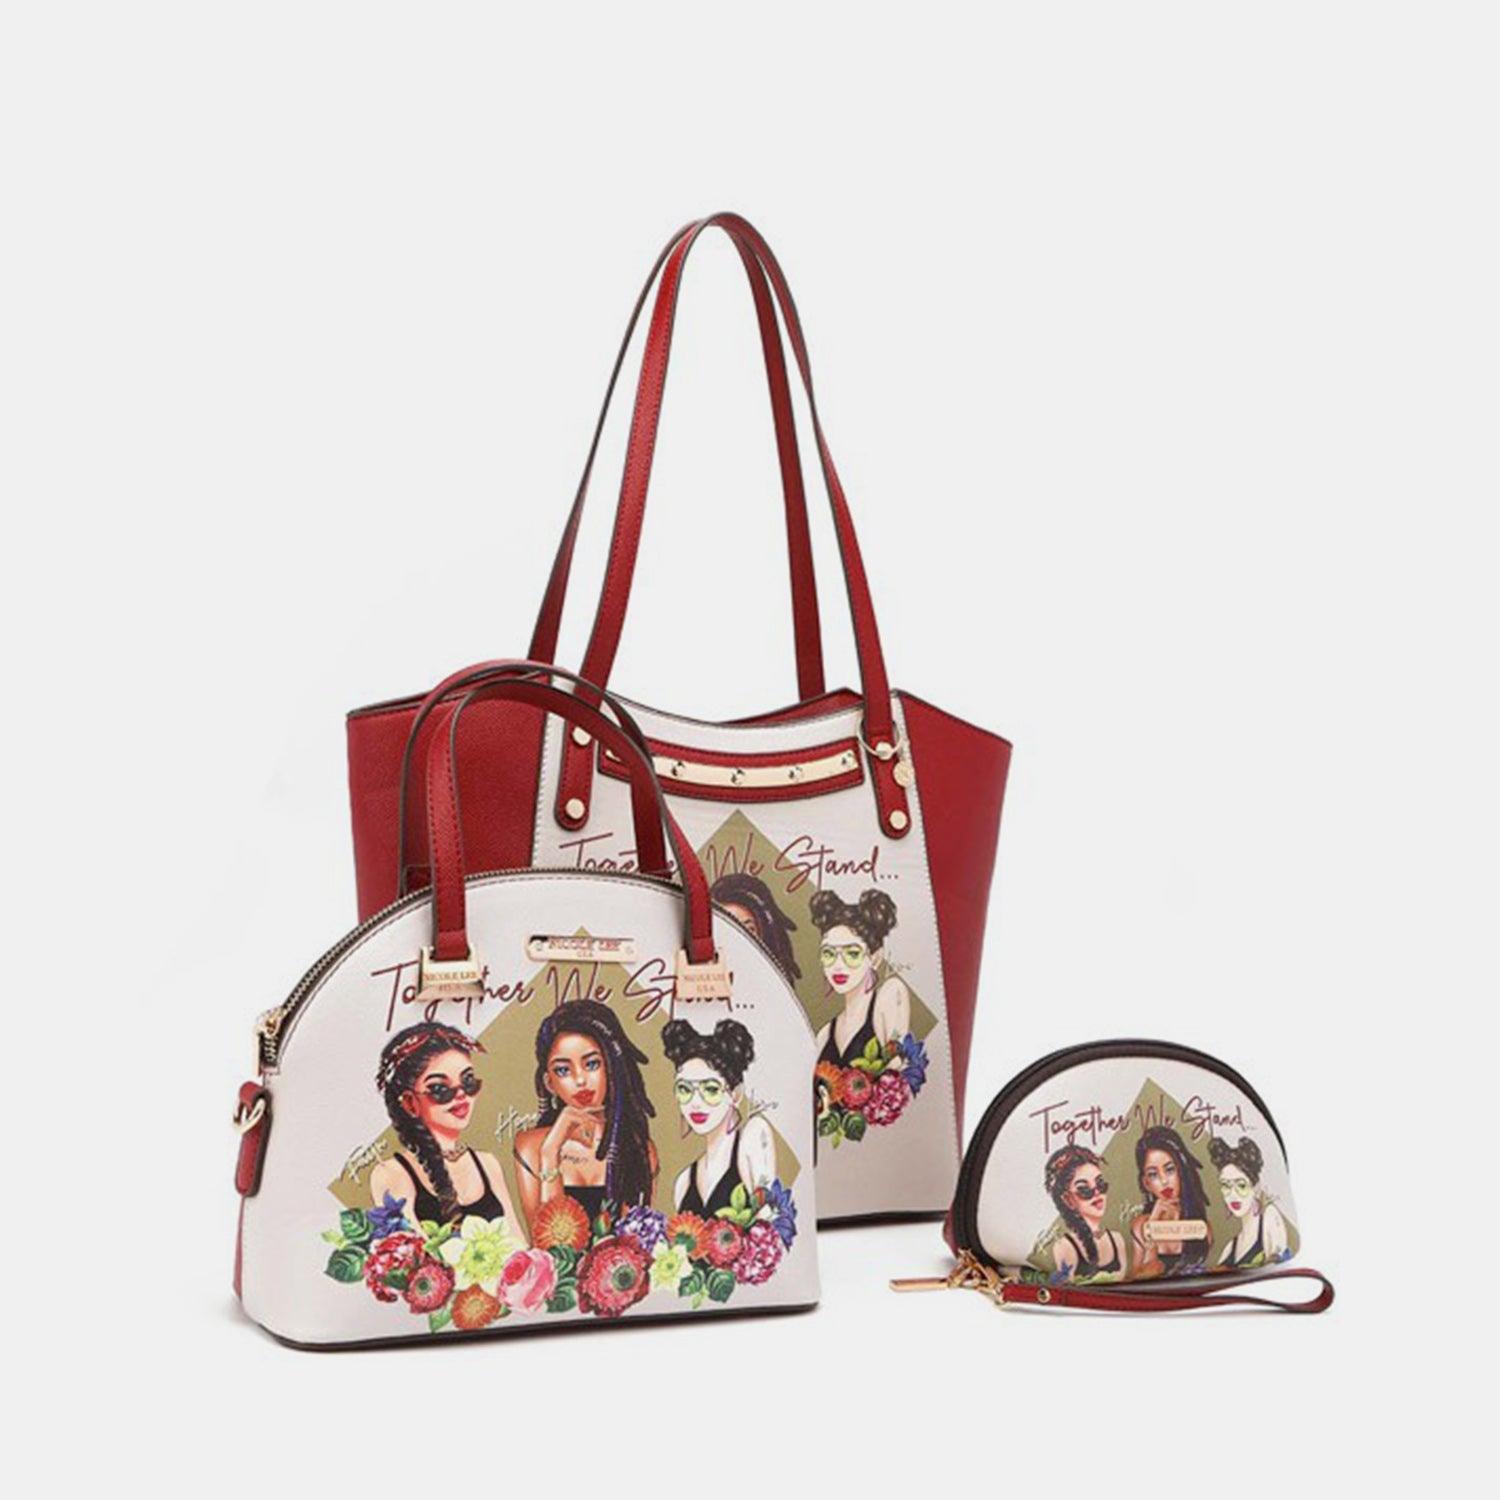 a woman's handbag and purse with a picture of a woman on it